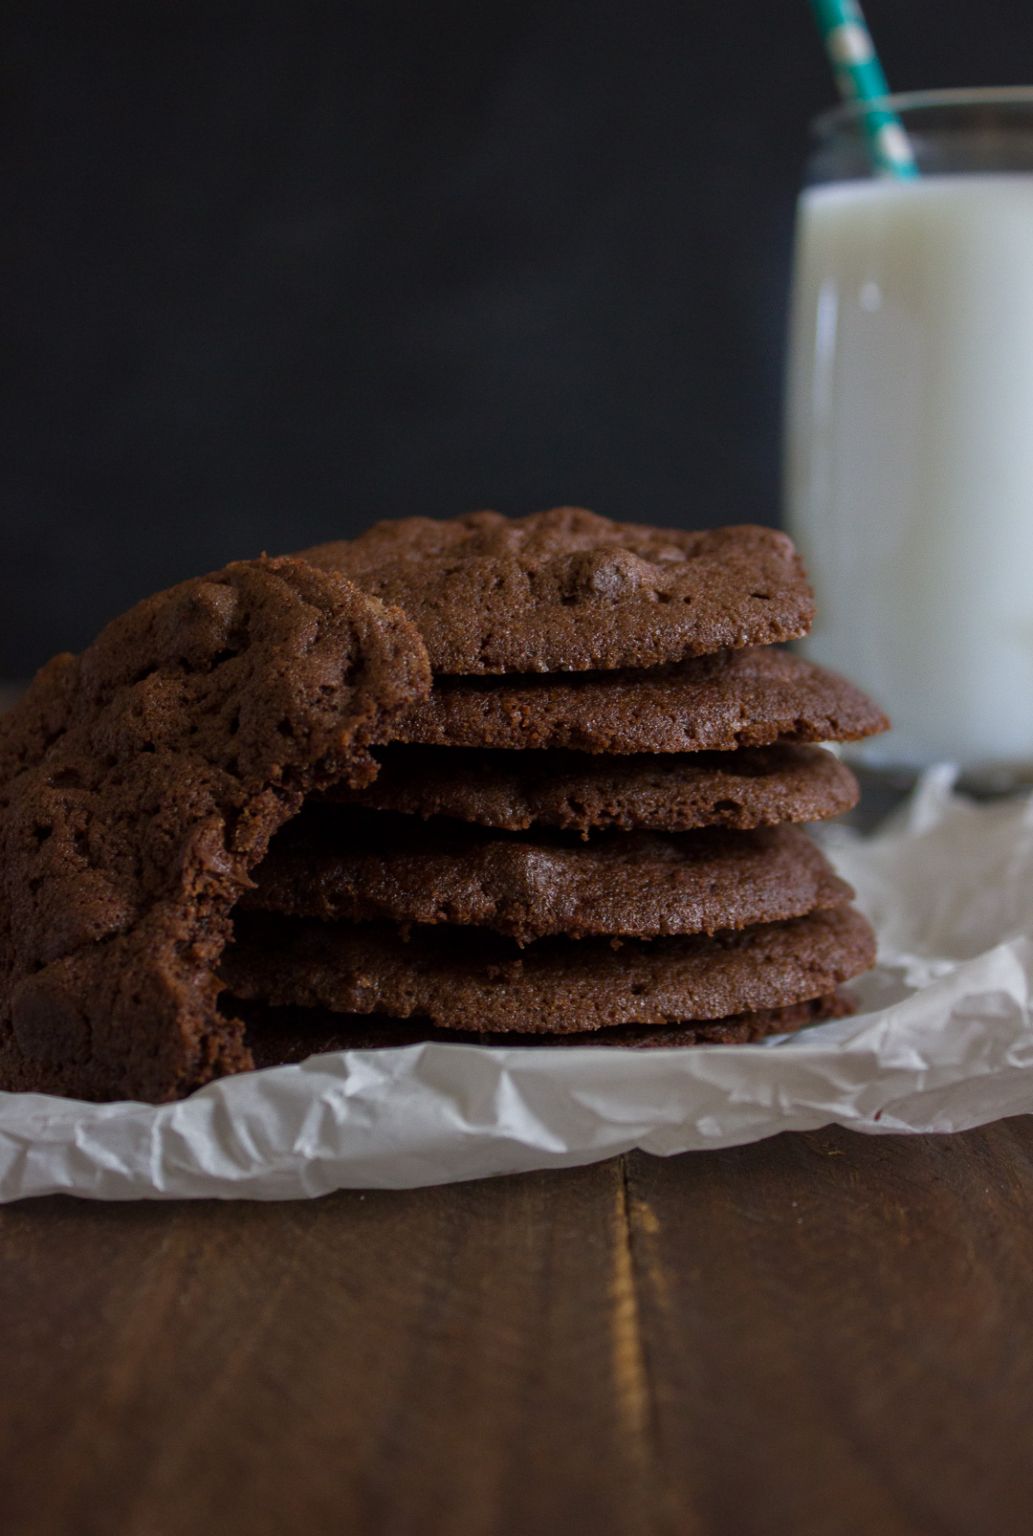 Decadent, rich Double Chocolate Chip Cookies. The stuff dreams are made of!